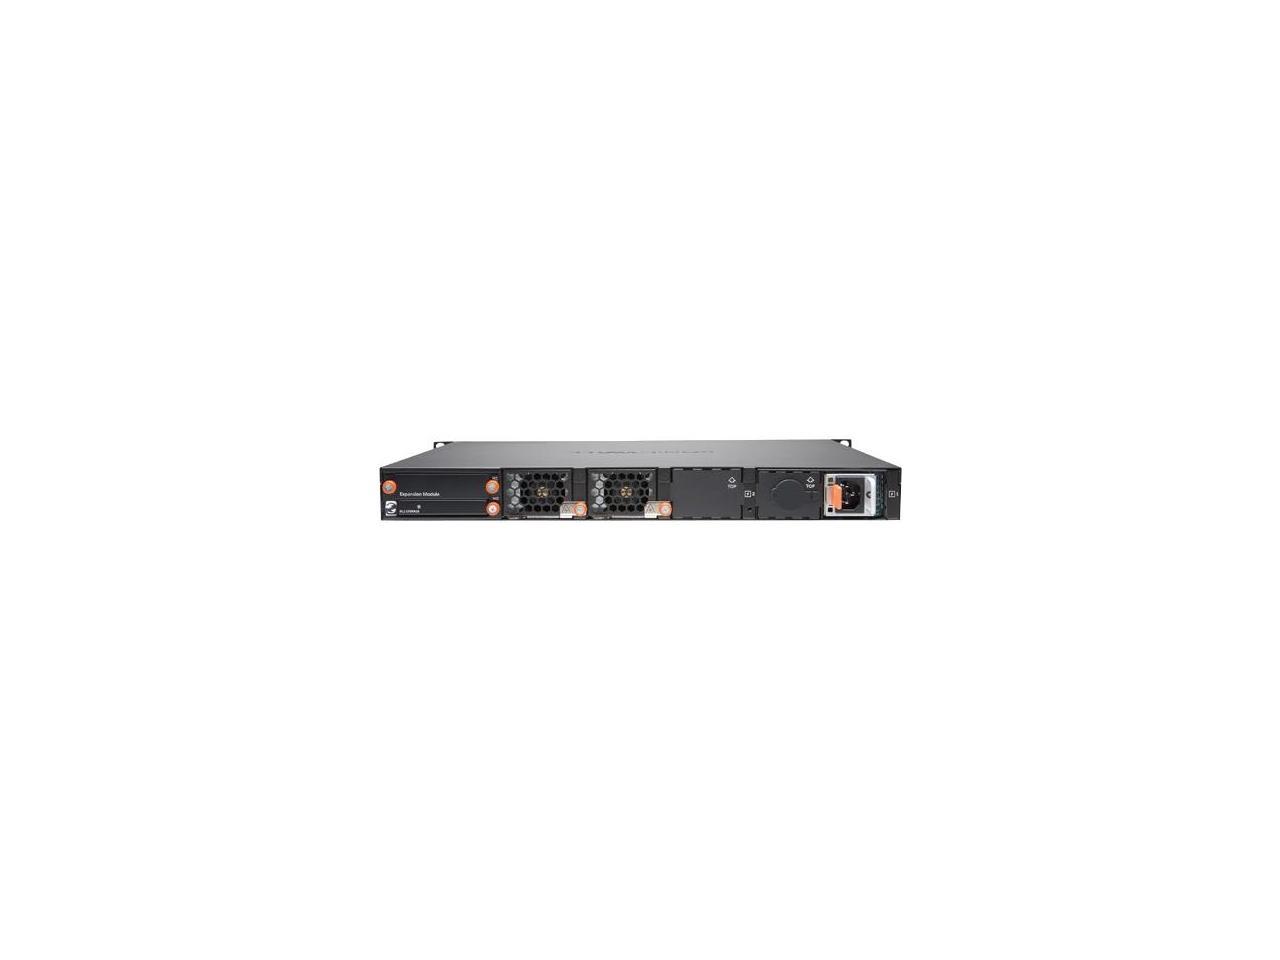 SonicWALL - 01-SSC-3216 - SonicWall NSA 4650 High Availability Network Security/Firewall Appliance - 20 Port -